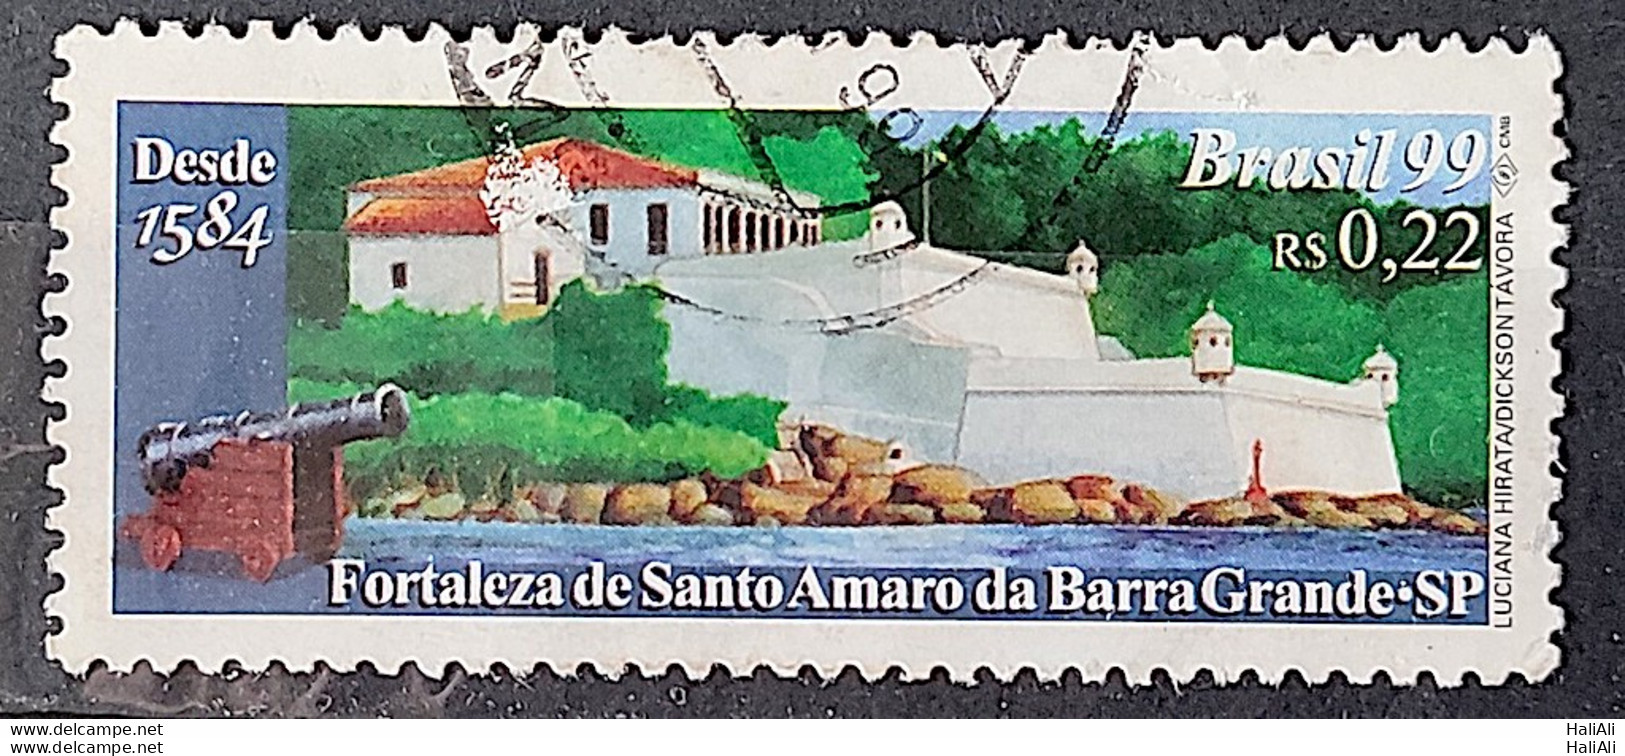 C 2194 Brazil Stamp Fortress Of Santo Amaro Of Barra Grande Military 1999 Circulated 2 - Oblitérés